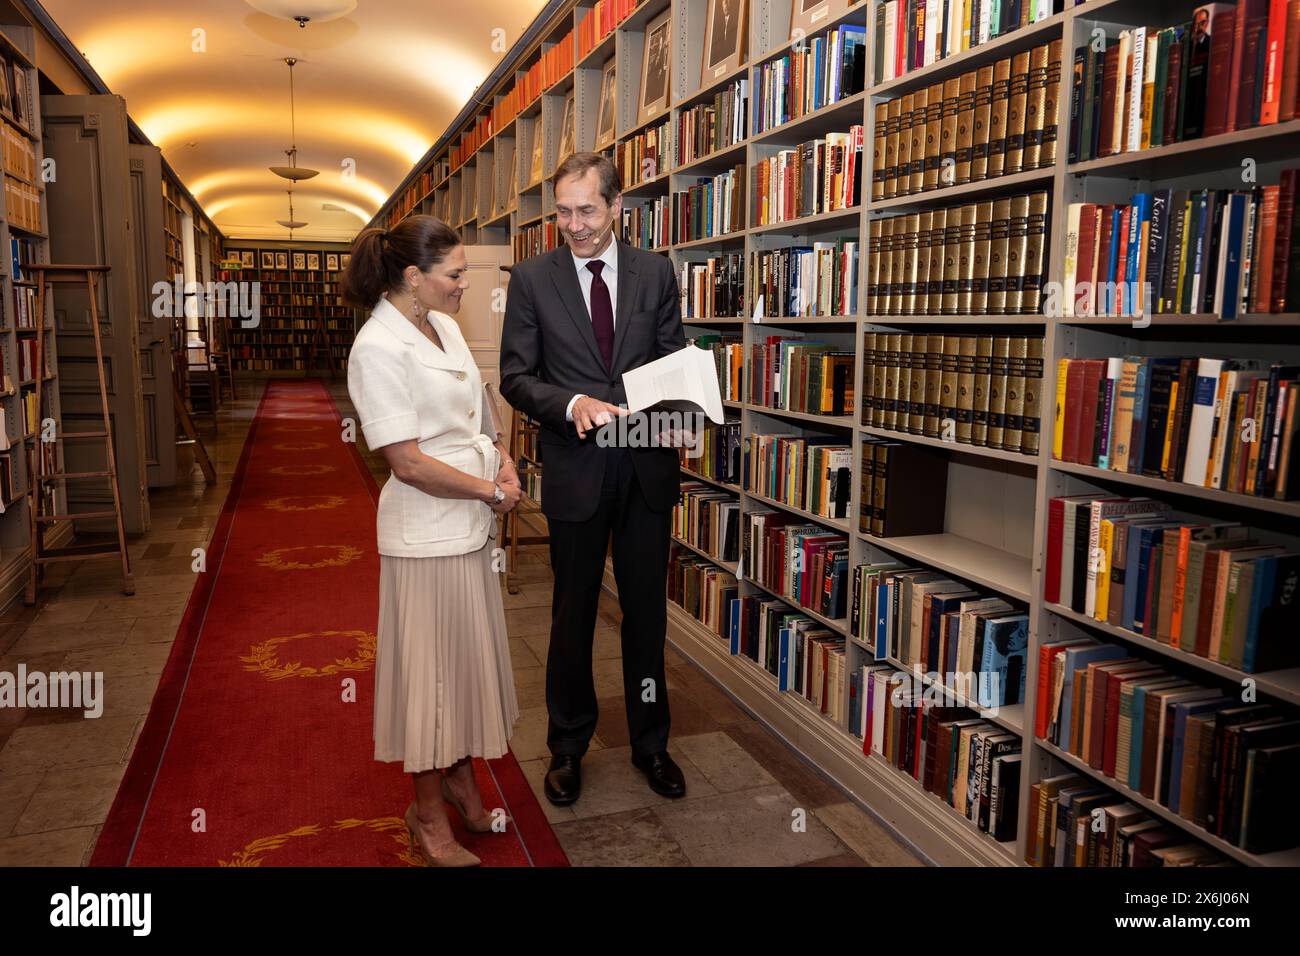 Stockholm, Sweden. 15th May, 2024. Crown Princess Victoria of Sweden attends the celebration of the new Swedish Academy Dictionary (SAOB), at the Swedish Academy in Stockholm Sweden, Wednesday May 15, 2024. Here the Crown Princess is seen together with Mats Malm, Permanent Secretary of the Swedish Academy. Photo: Anders Wiklund/TT/Code 10040 Credit: TT News Agency/Alamy Live News Stock Photo